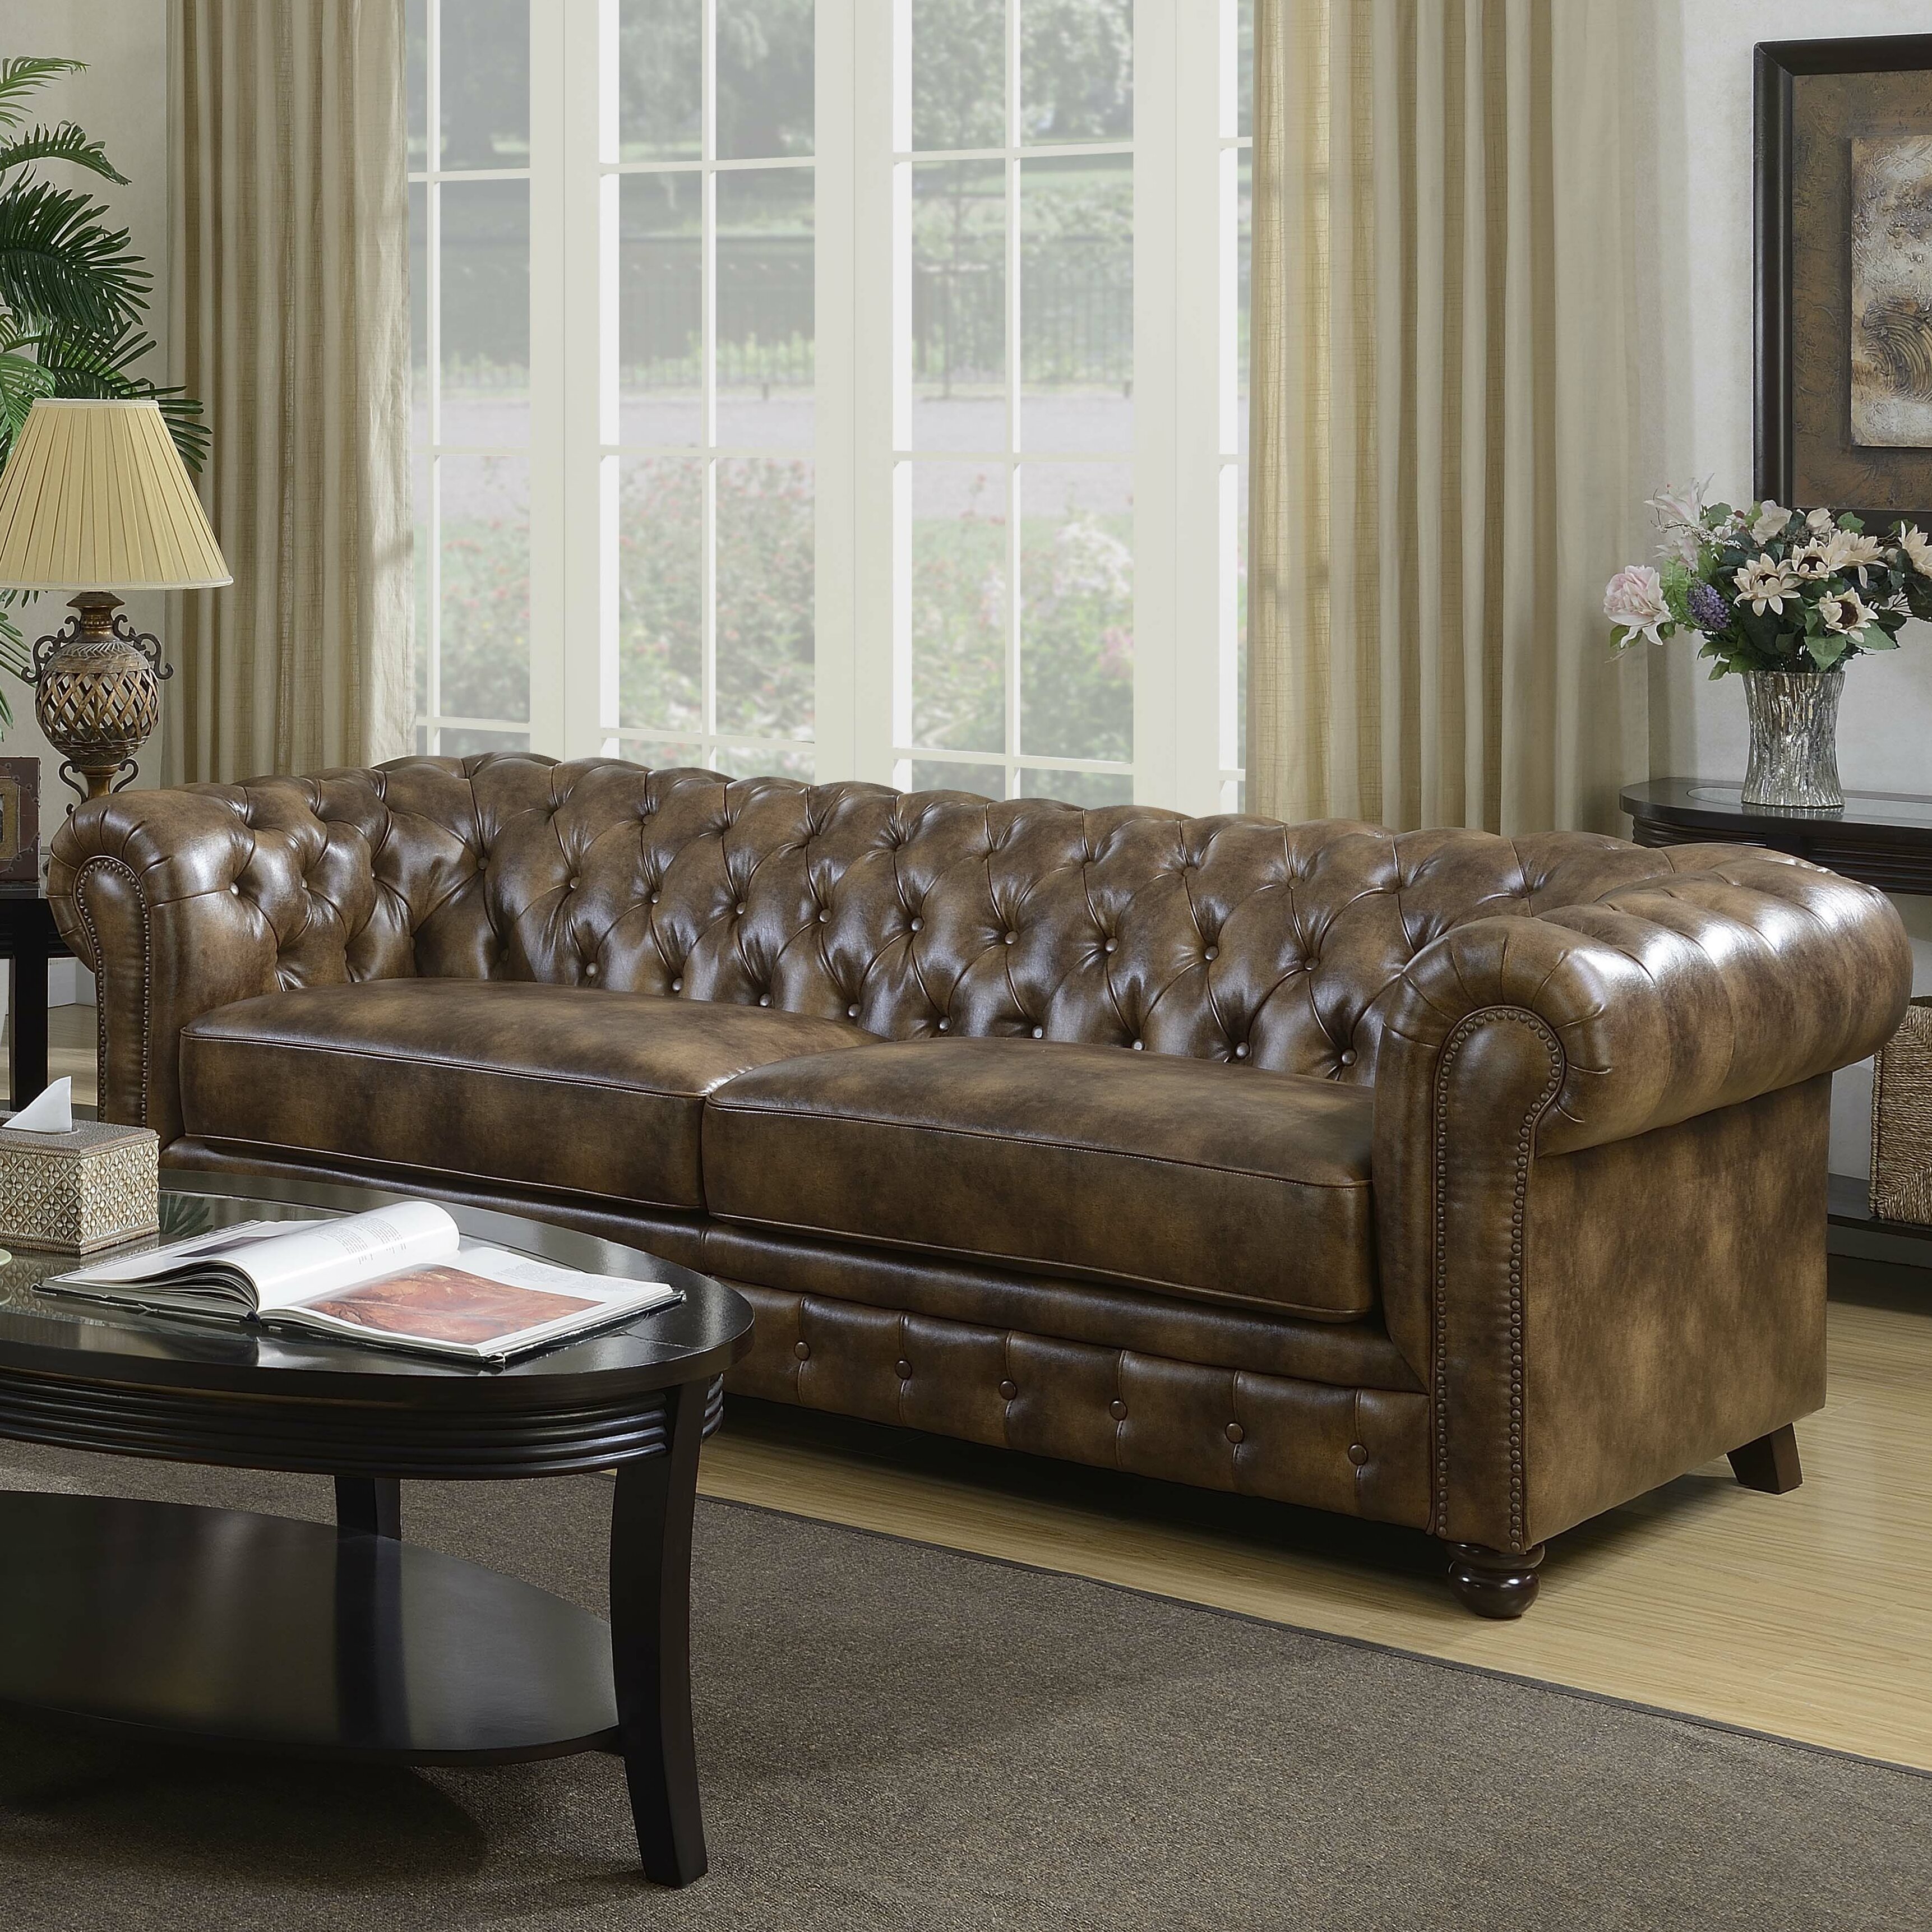 Moroney 91” Faux Leather Rolled Arm Chesterfield Sofa